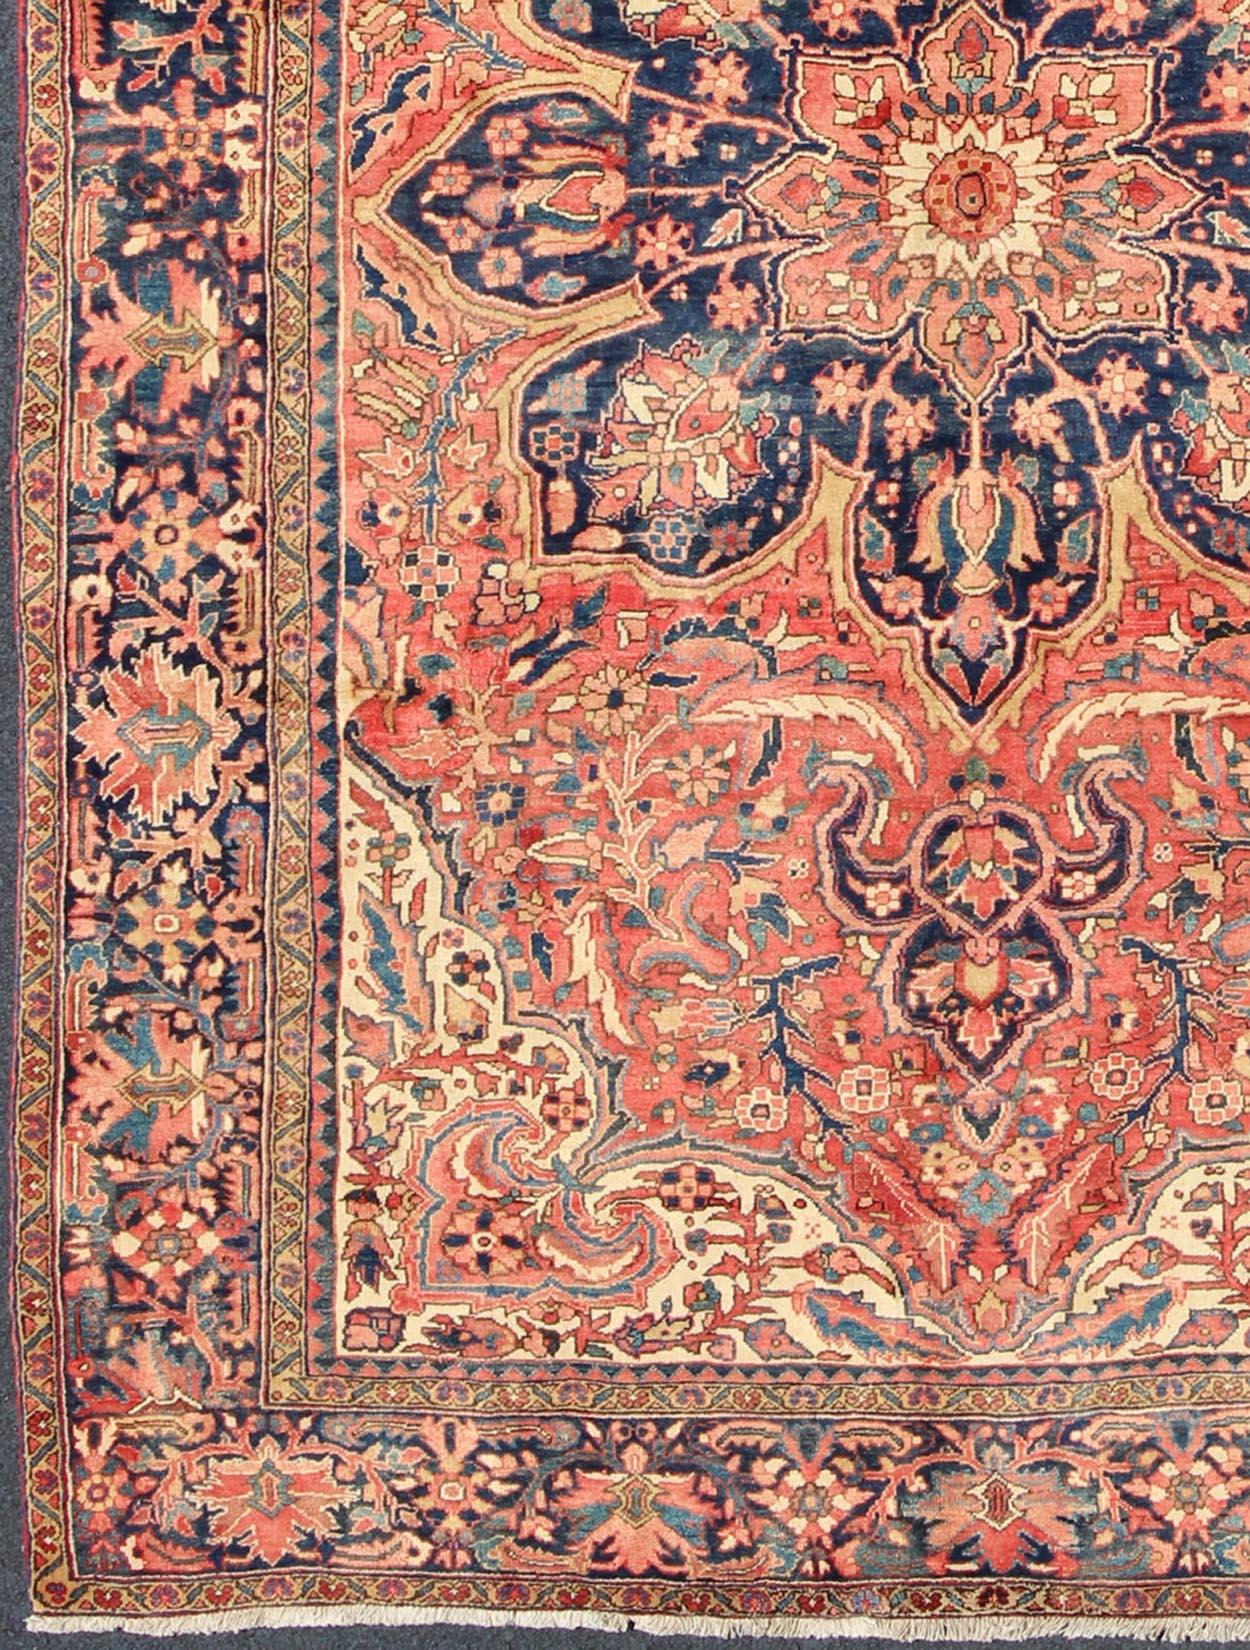 Midcentury Persian Heriz rug with floral medallion design in red and blue, rug h-507-06, country of origin / type: Iran / Heriz, circa 1950

This magnificent vintage Persian Heriz carpet from the mid-20th century (circa 1950) bears an exquisite